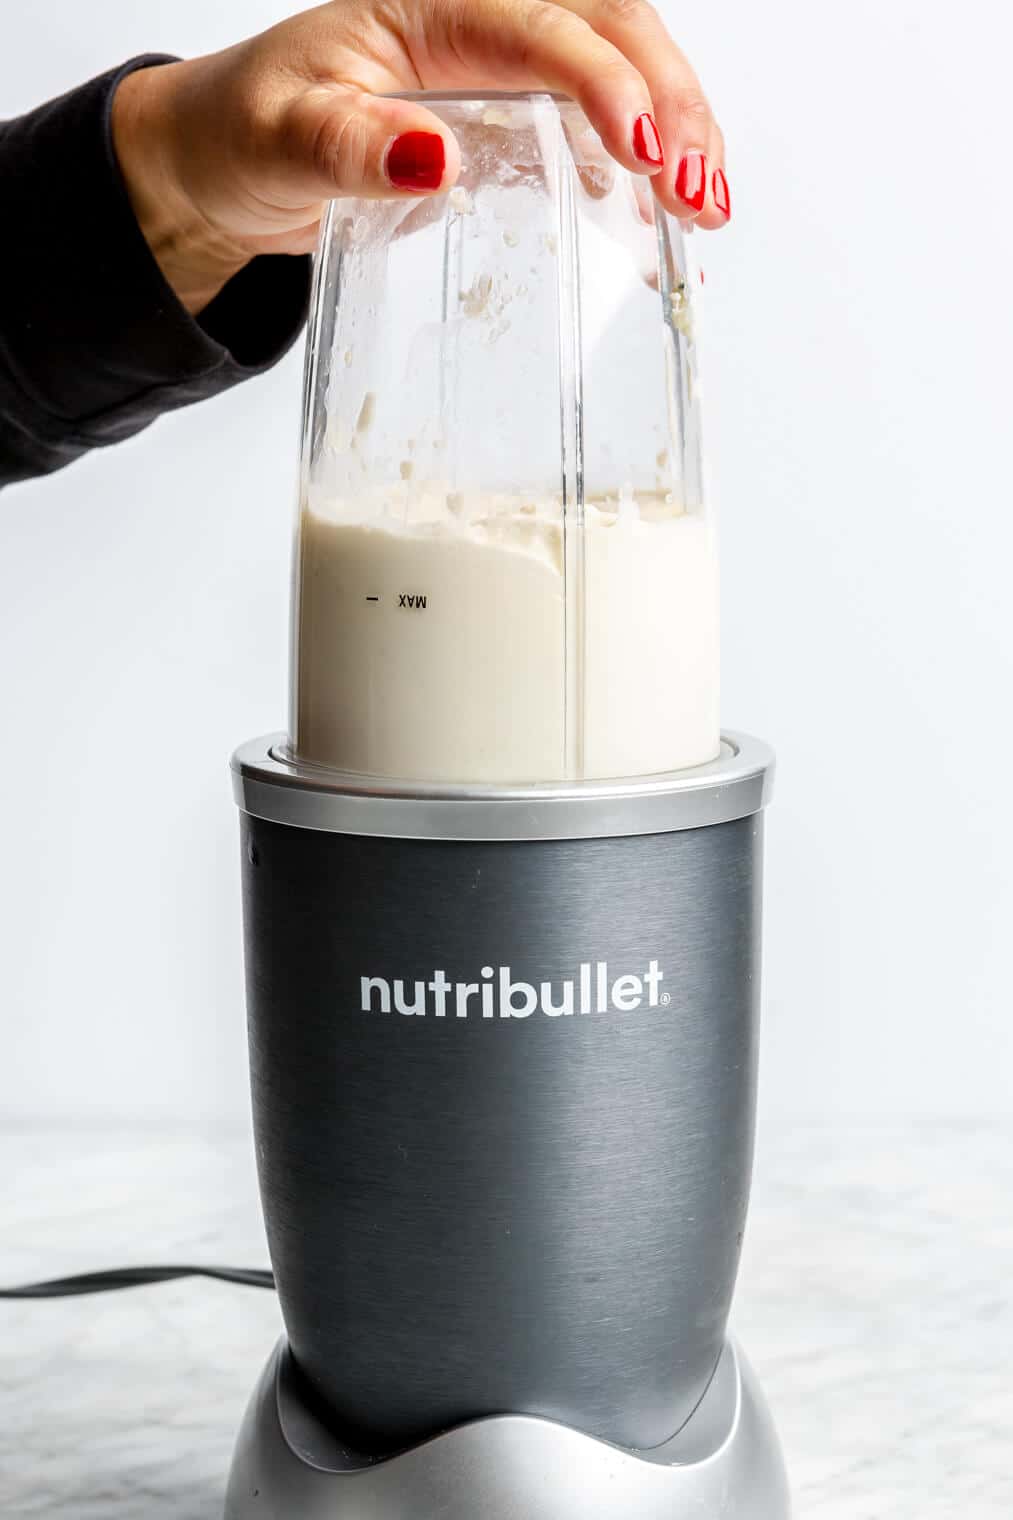 Hand holding down the blender container of a nutribullet.